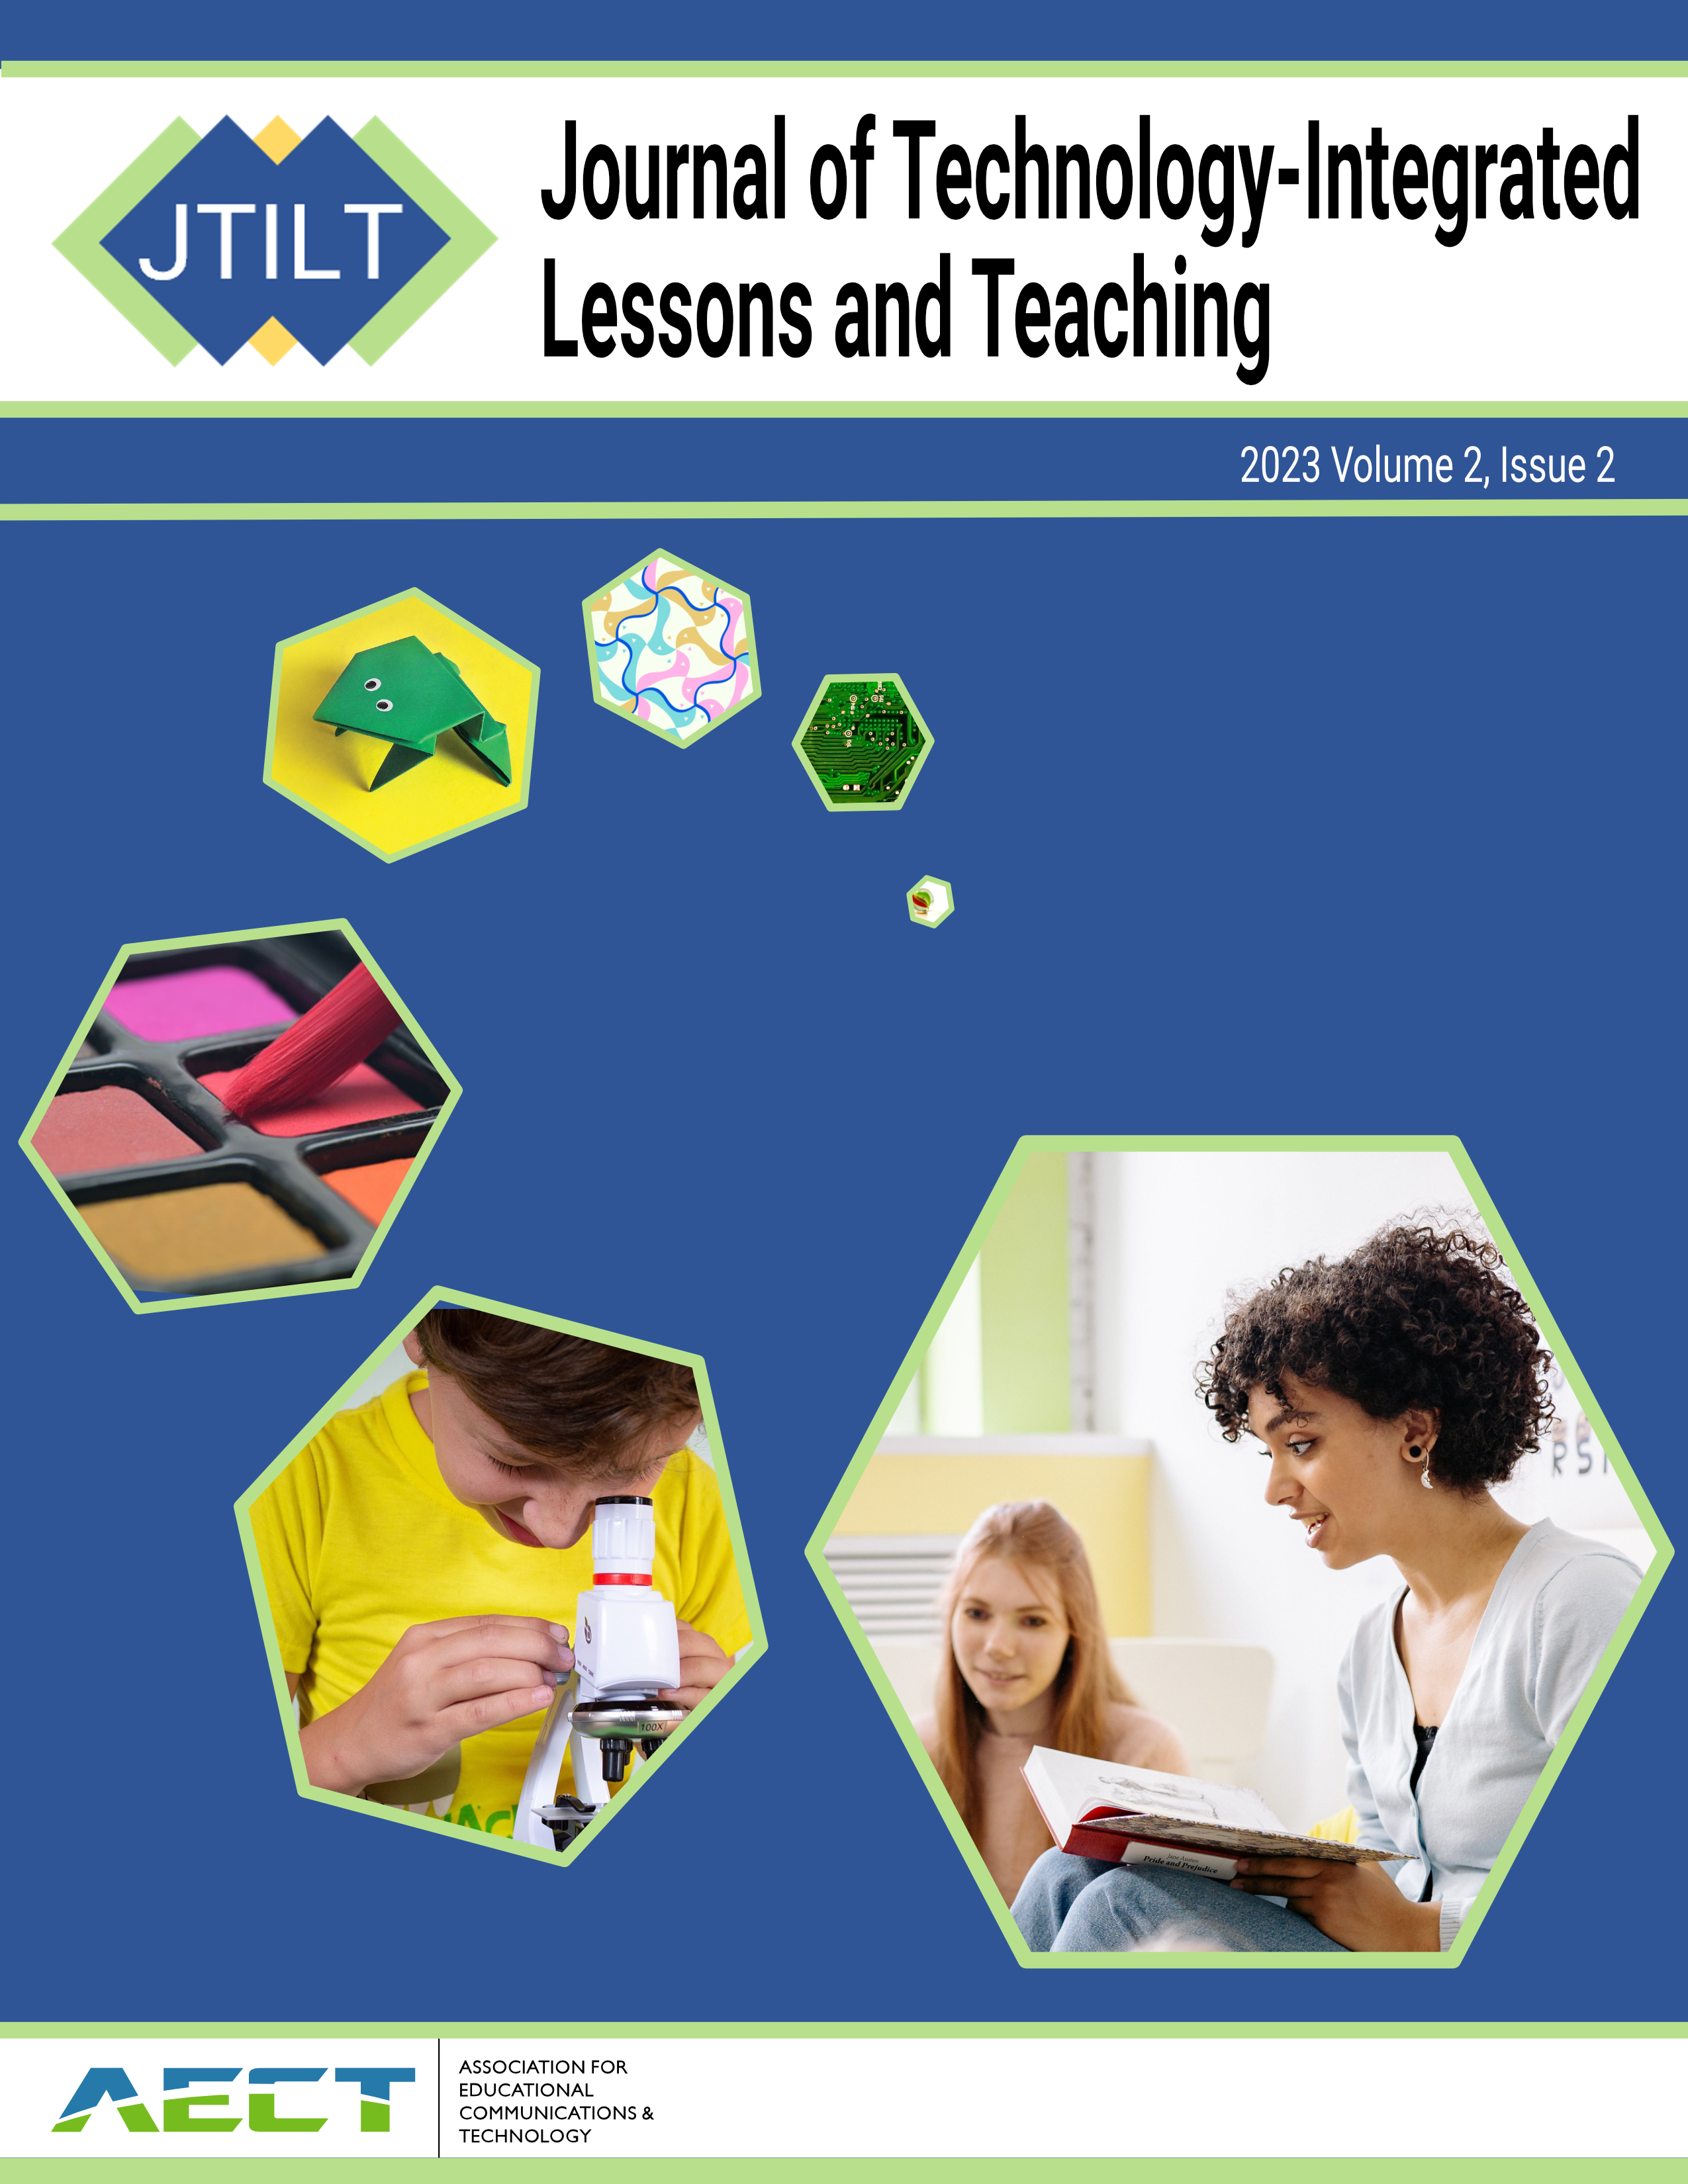 Images of frogs, tessellations, circuts, students, and a teacher in hexagon shapes under the banner: Journal of Technology-Integrated Lessons and Teaching.